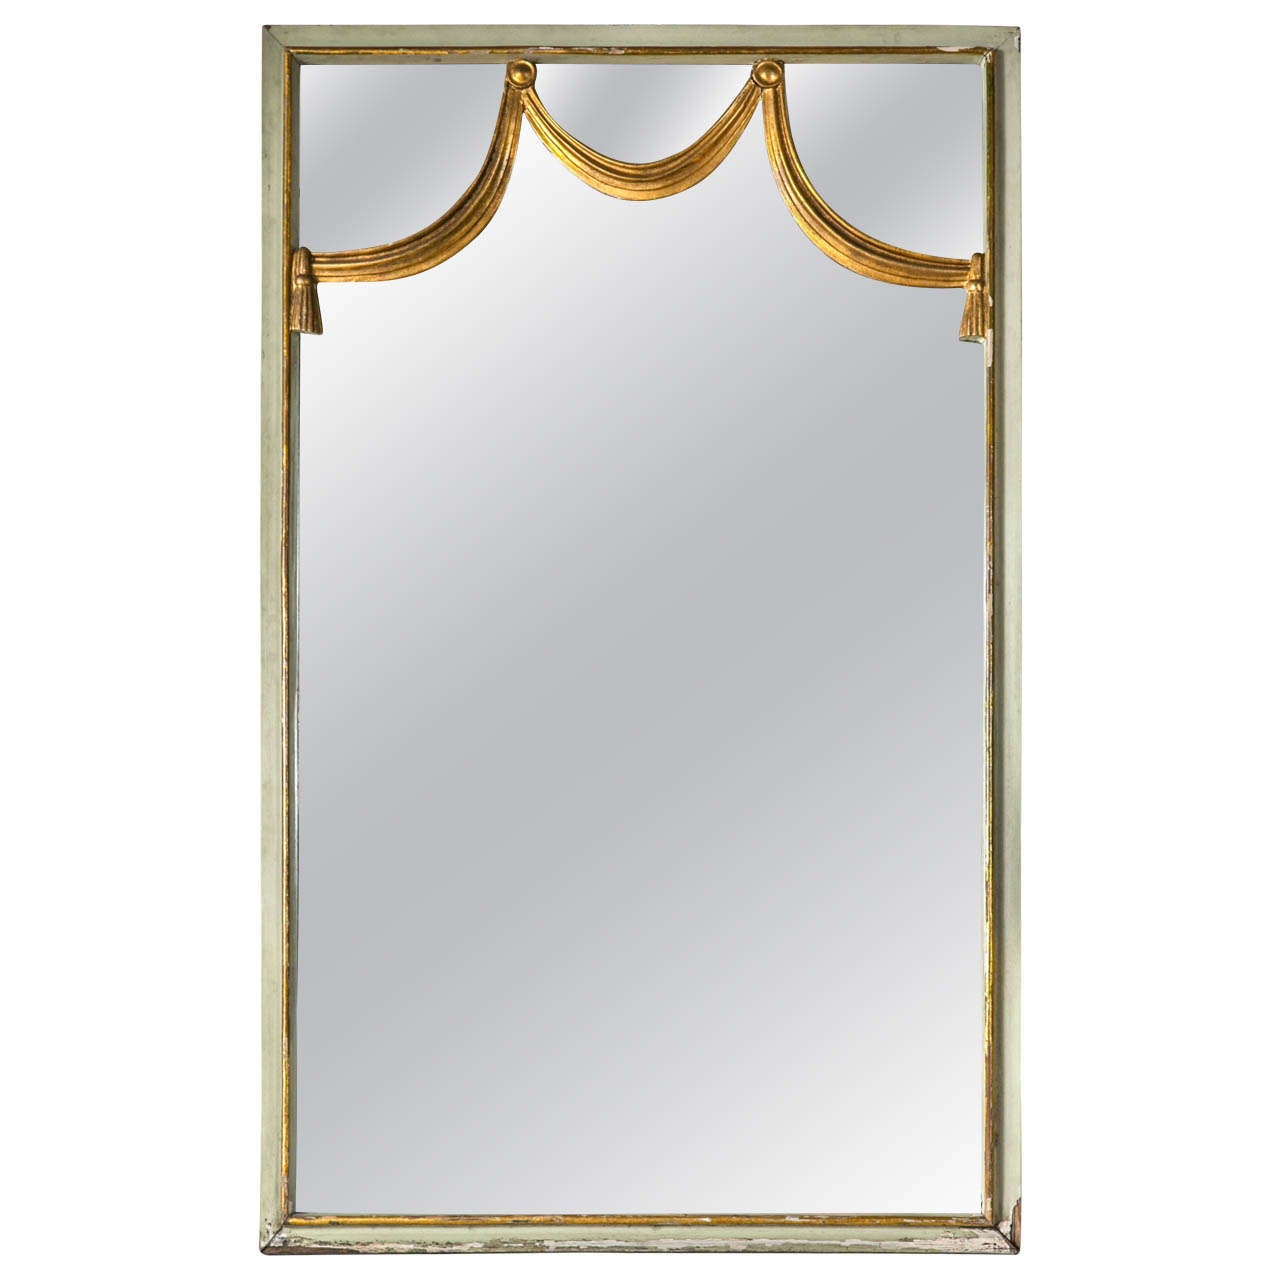 Dorothy Draper Mid-Century Wall Console Mirror Paint Decorated Gilt Gold Wood